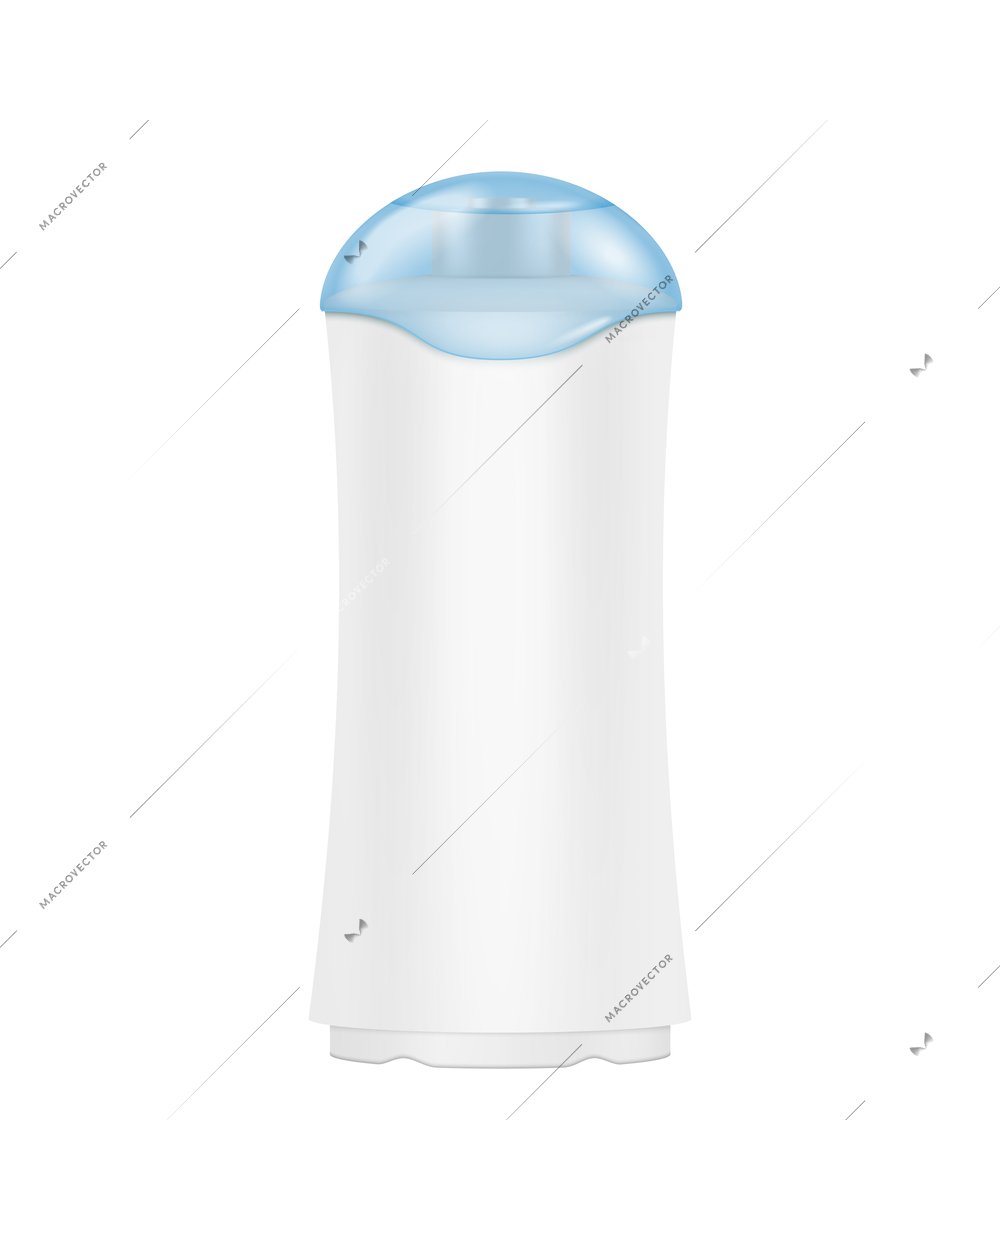 Blank plastic bottle of detergent with blue lid realistic vector illustration